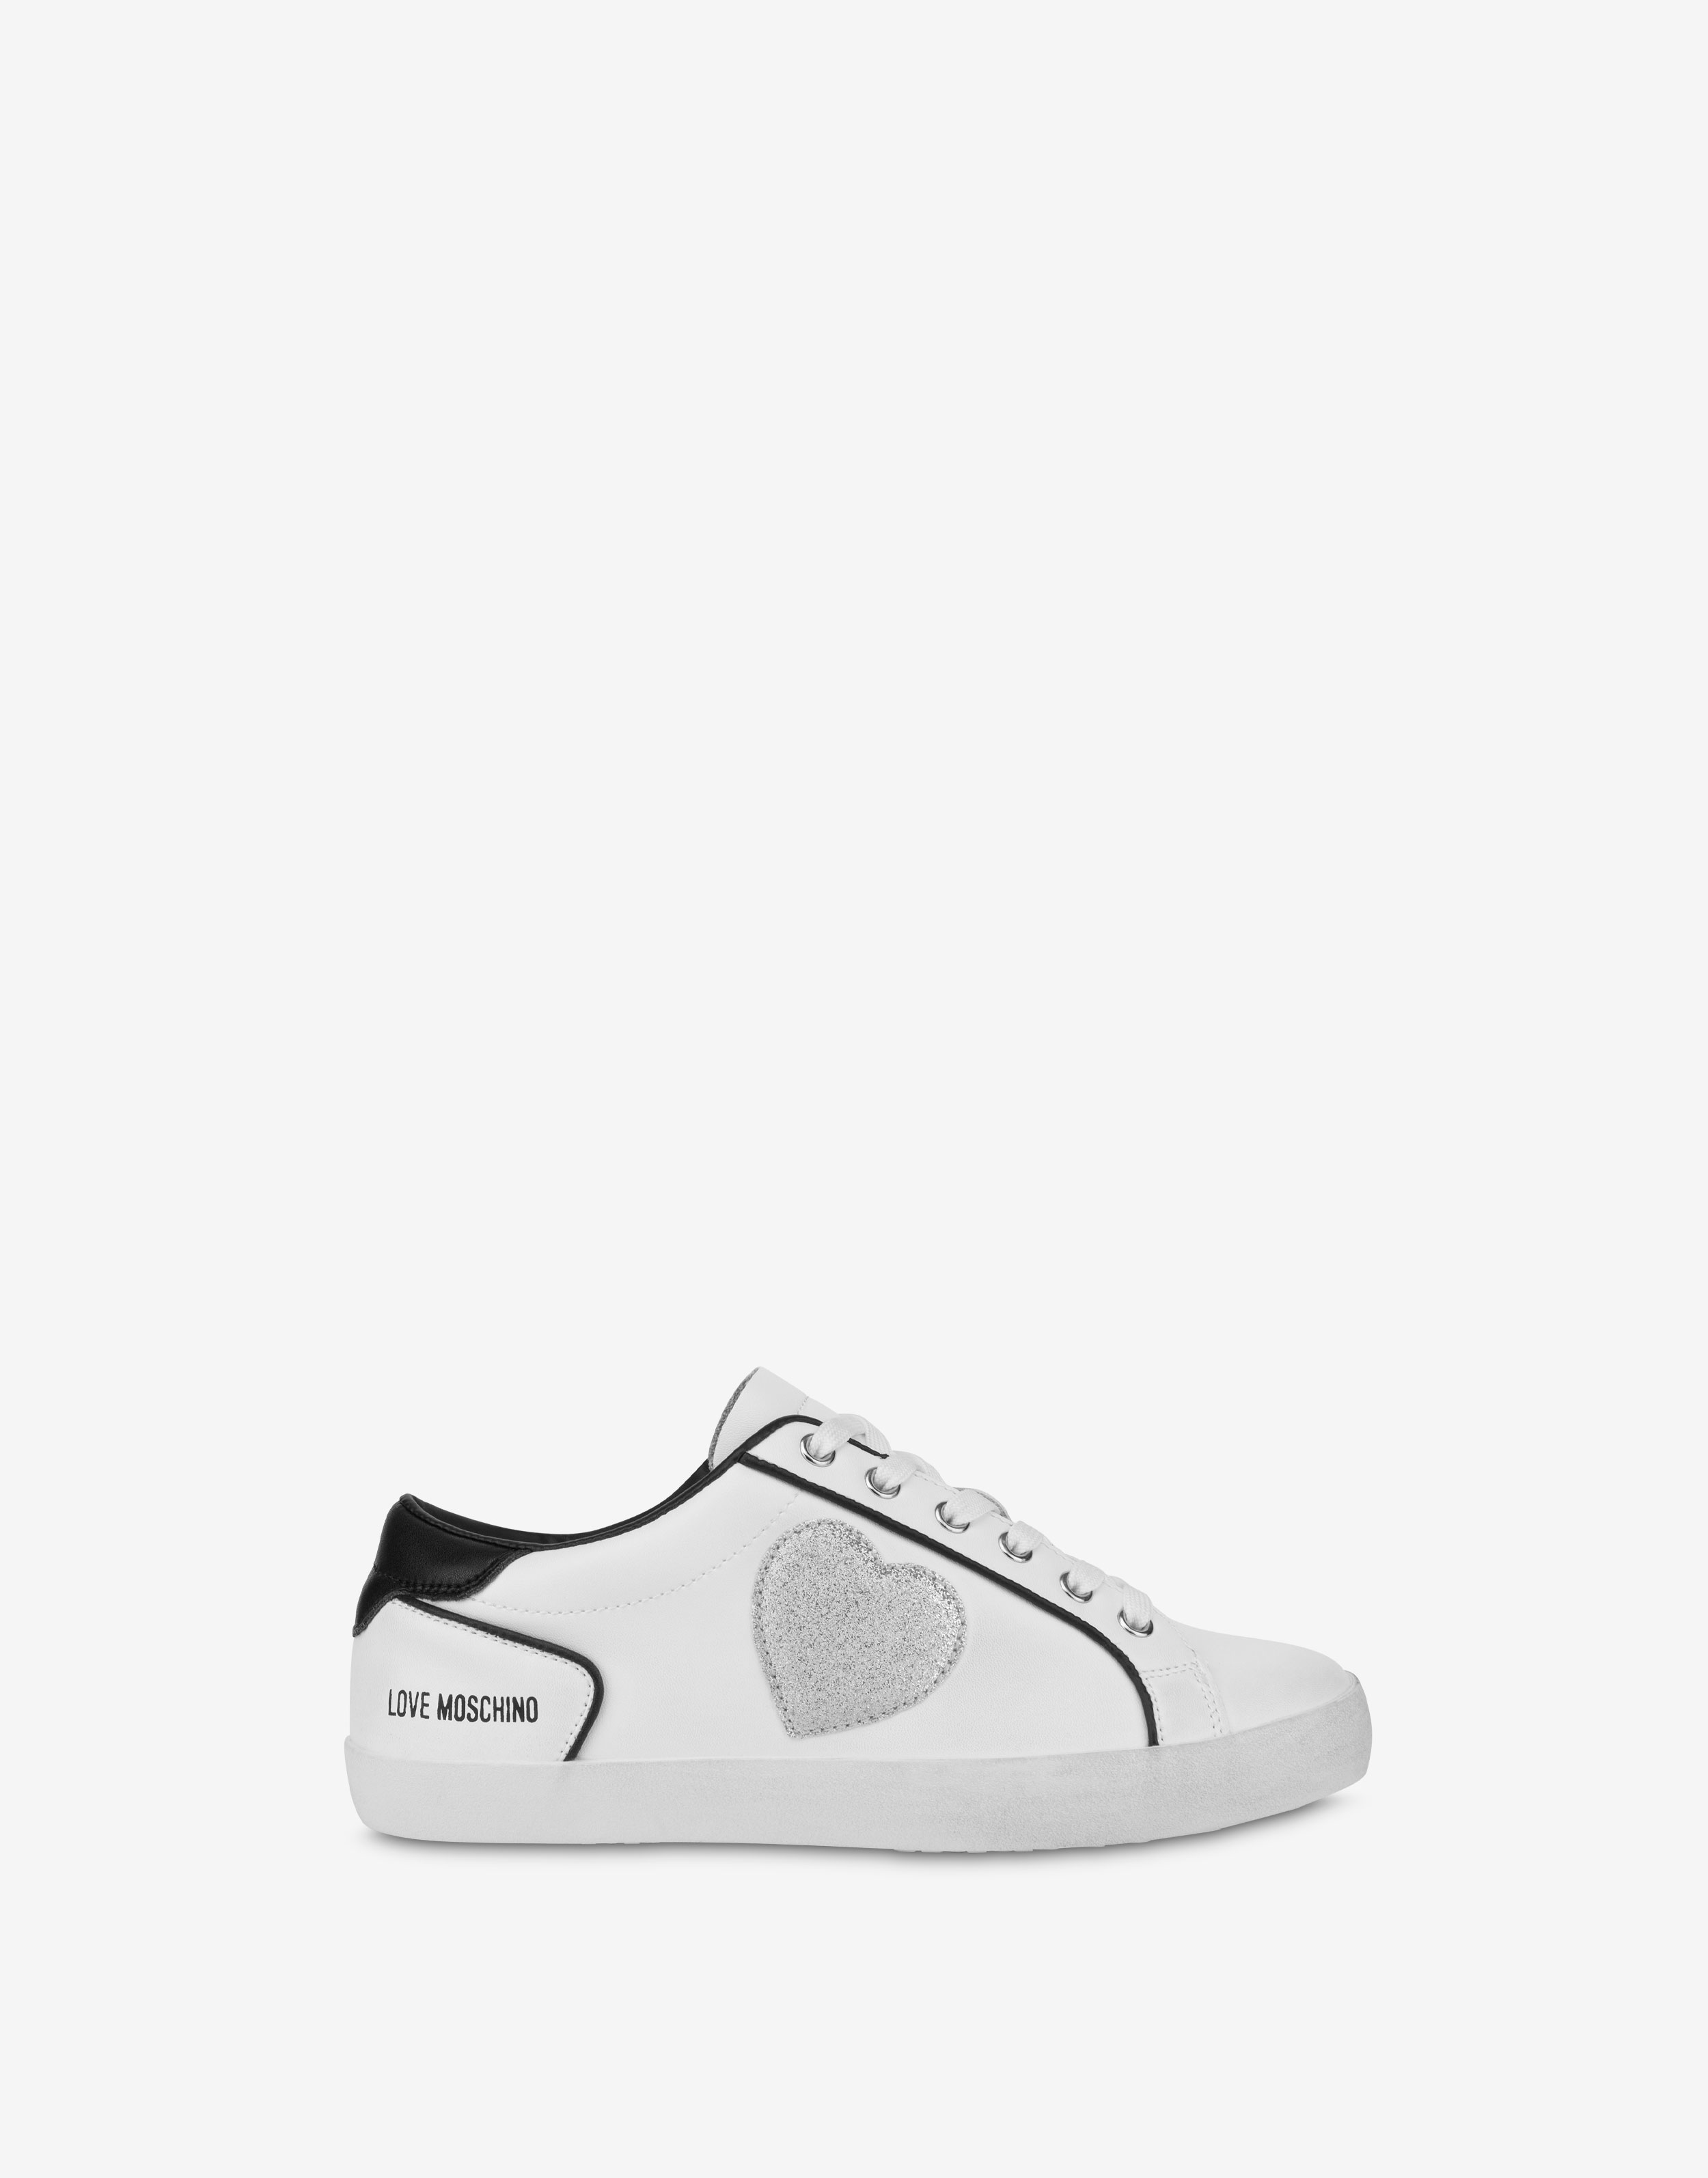 Love Moschino Sneakers for Women - Official Store